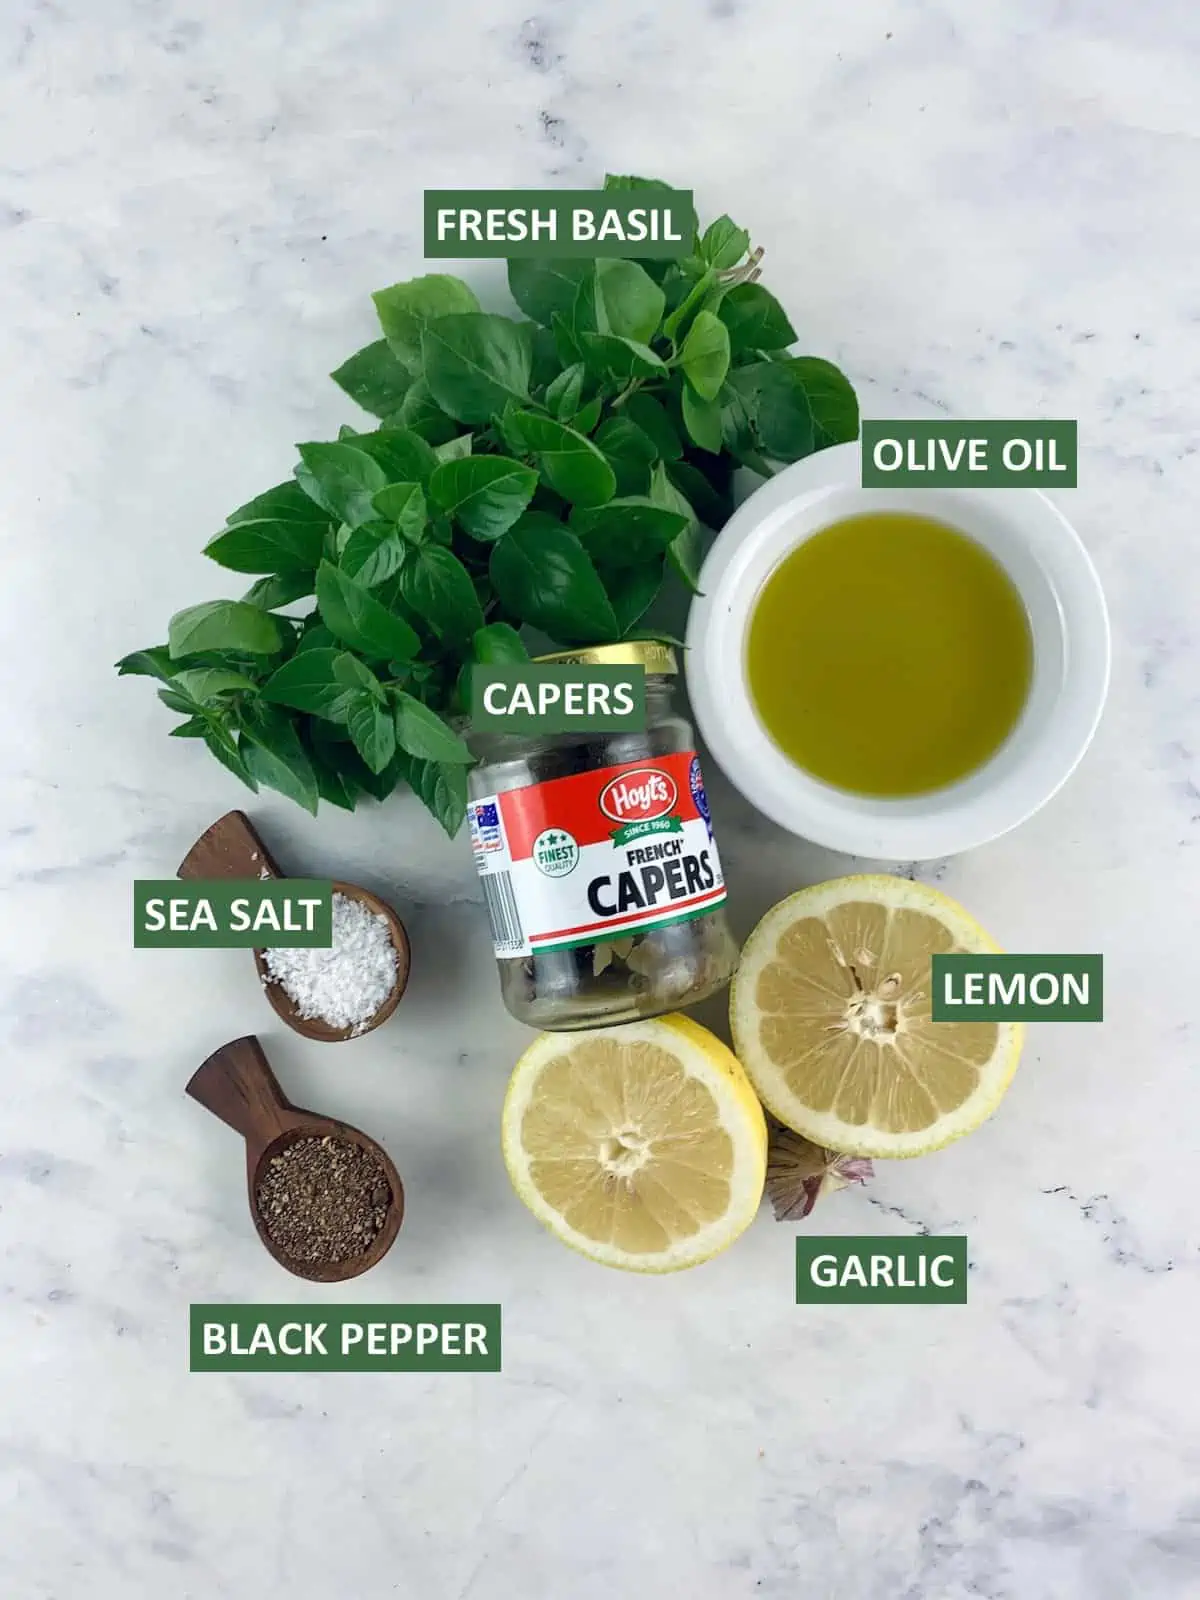 LABELLED INGREDIENTS NEEDED TO MAKE BASIL CAPER DRESSING